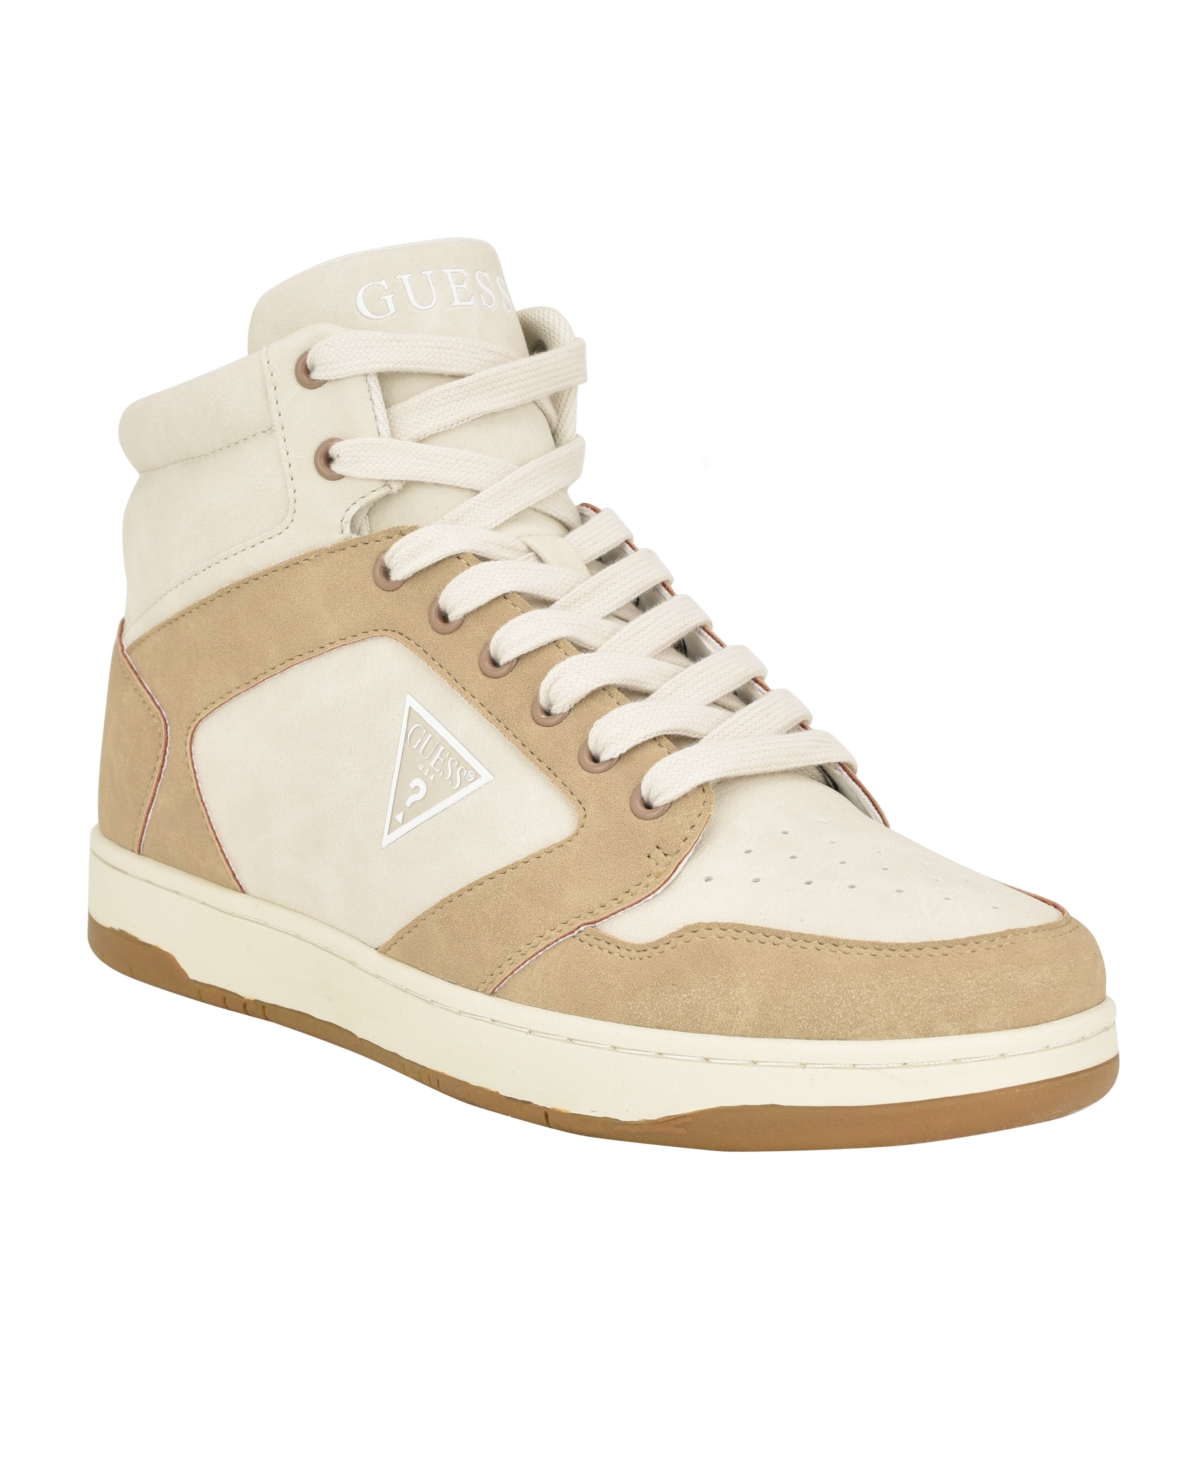 Men's Tubulo High Top Lace Up Fashion Sneakers - Light Brown, Light Natural